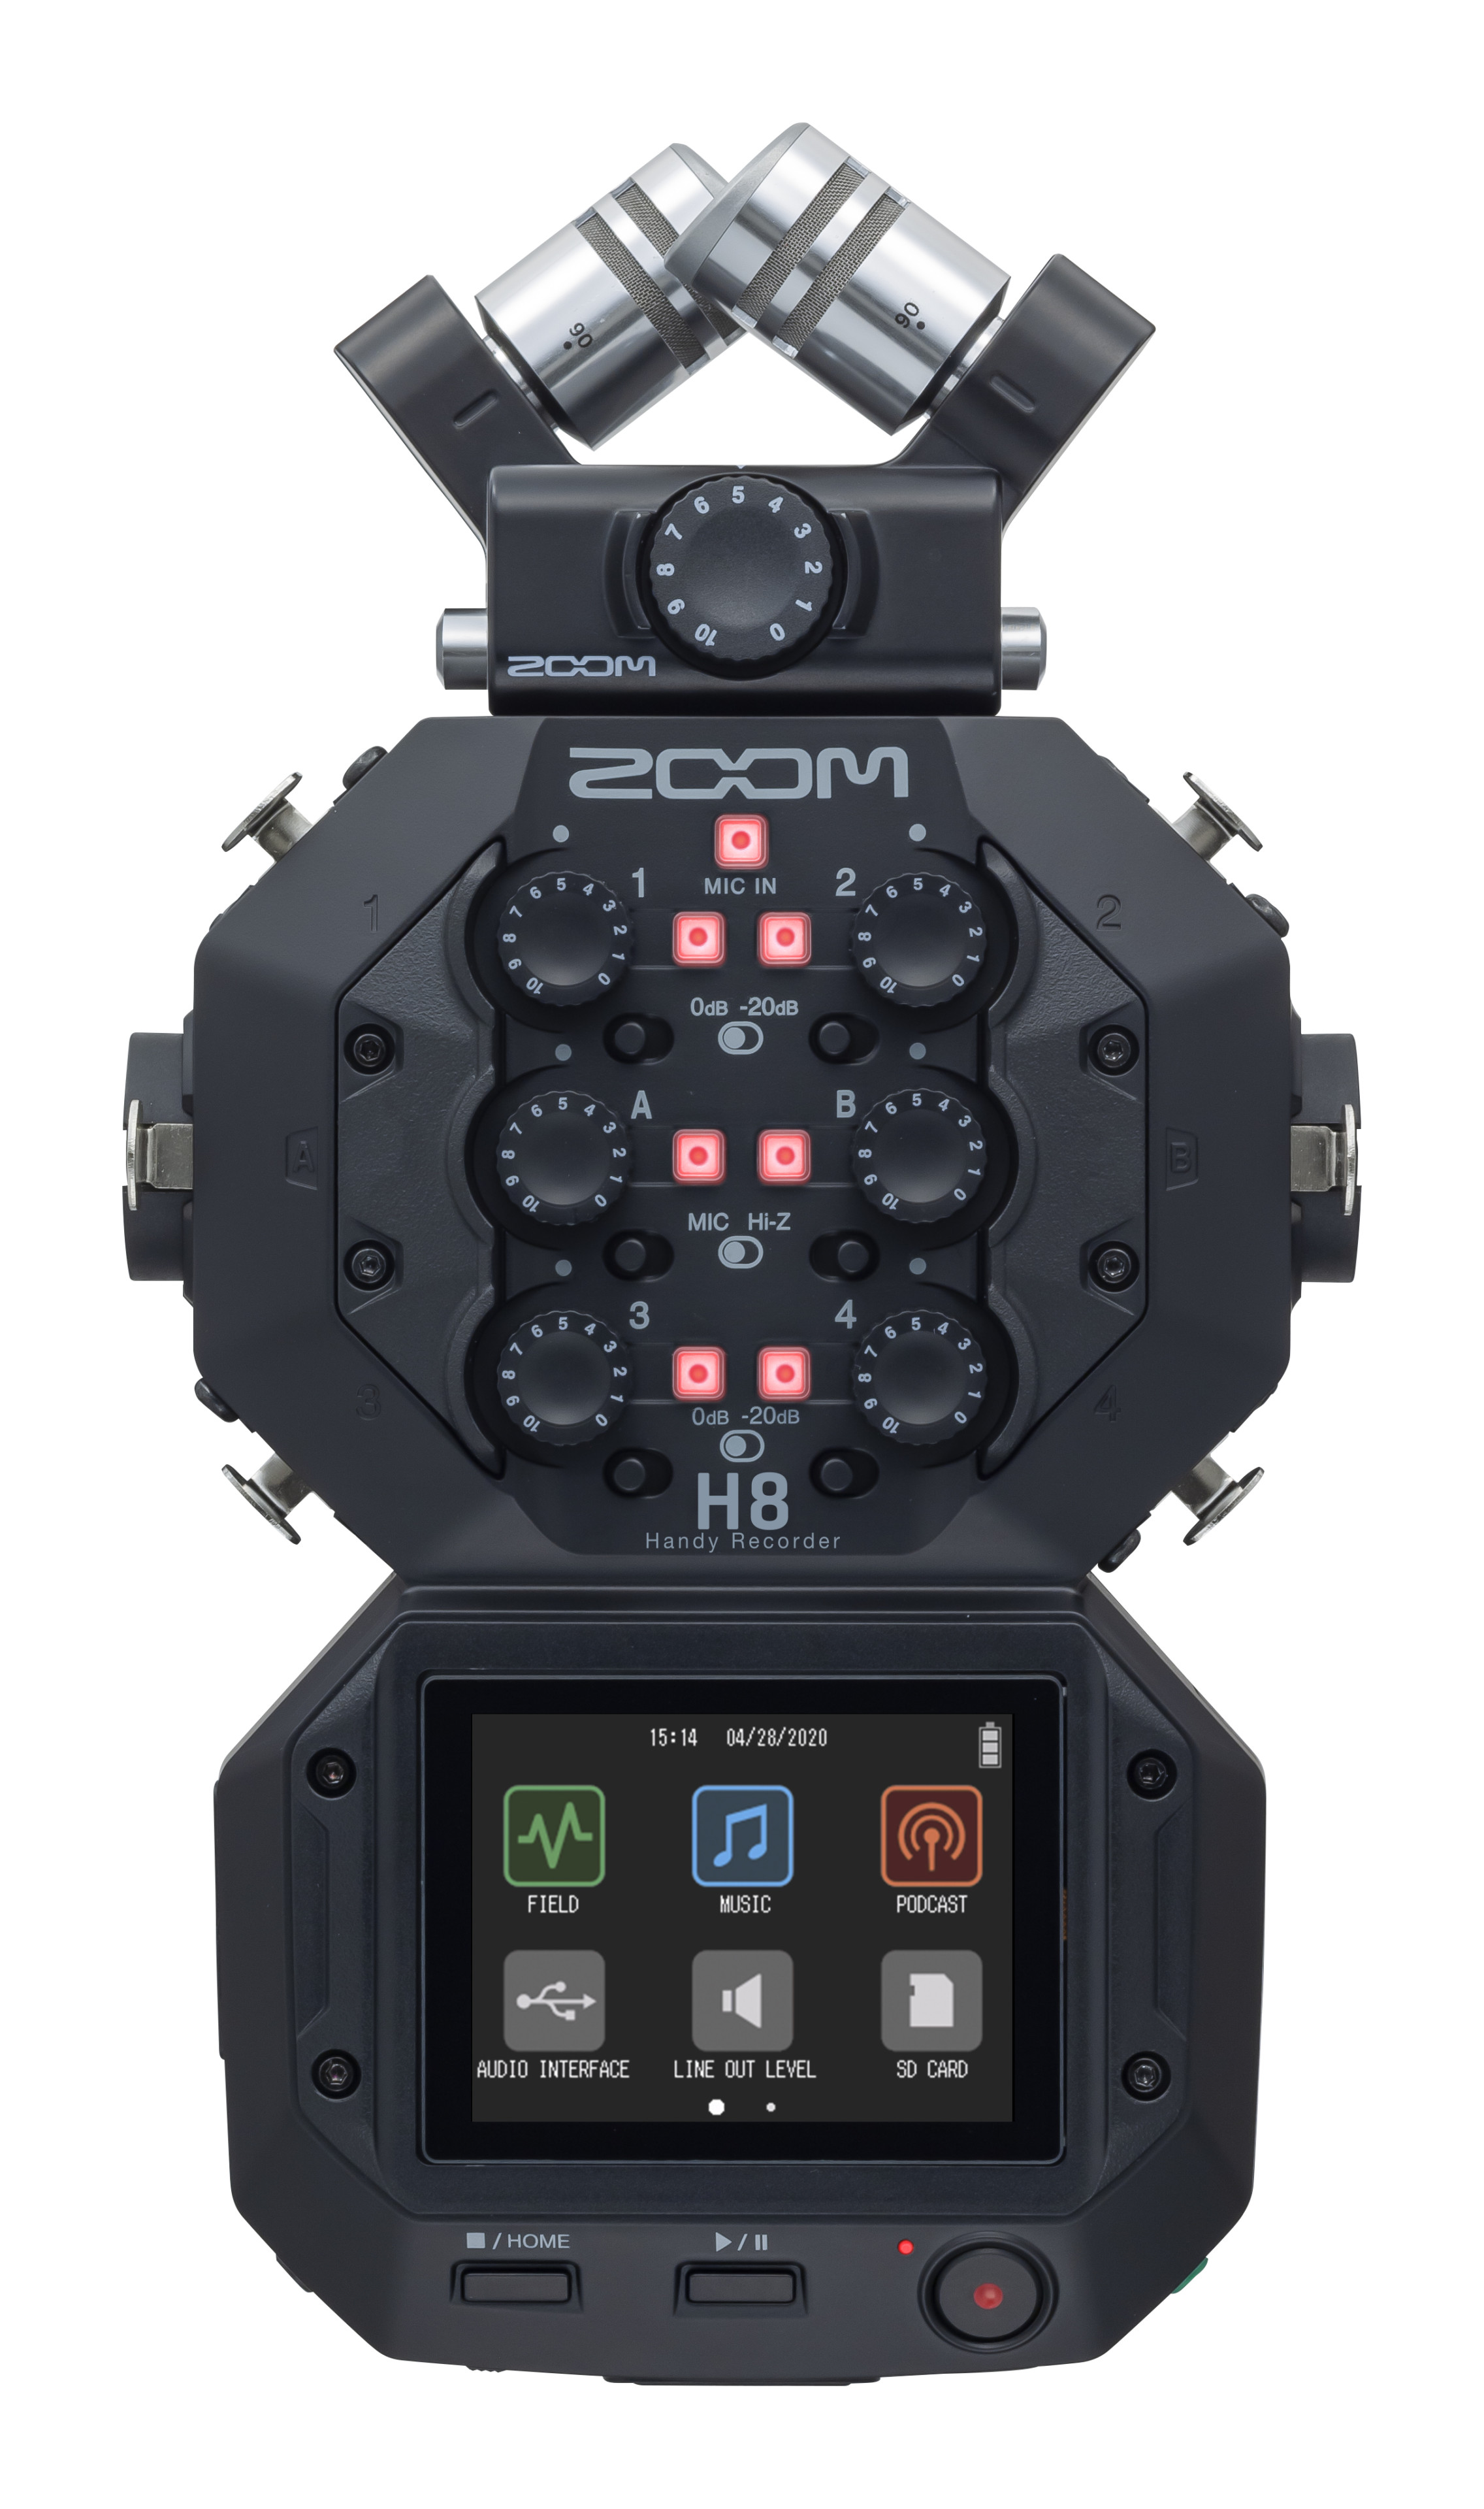 The New Zoom H8 Allows Musicians, Field Recorders And Podcasters To Record Up To 12 Tracks Simultaneously